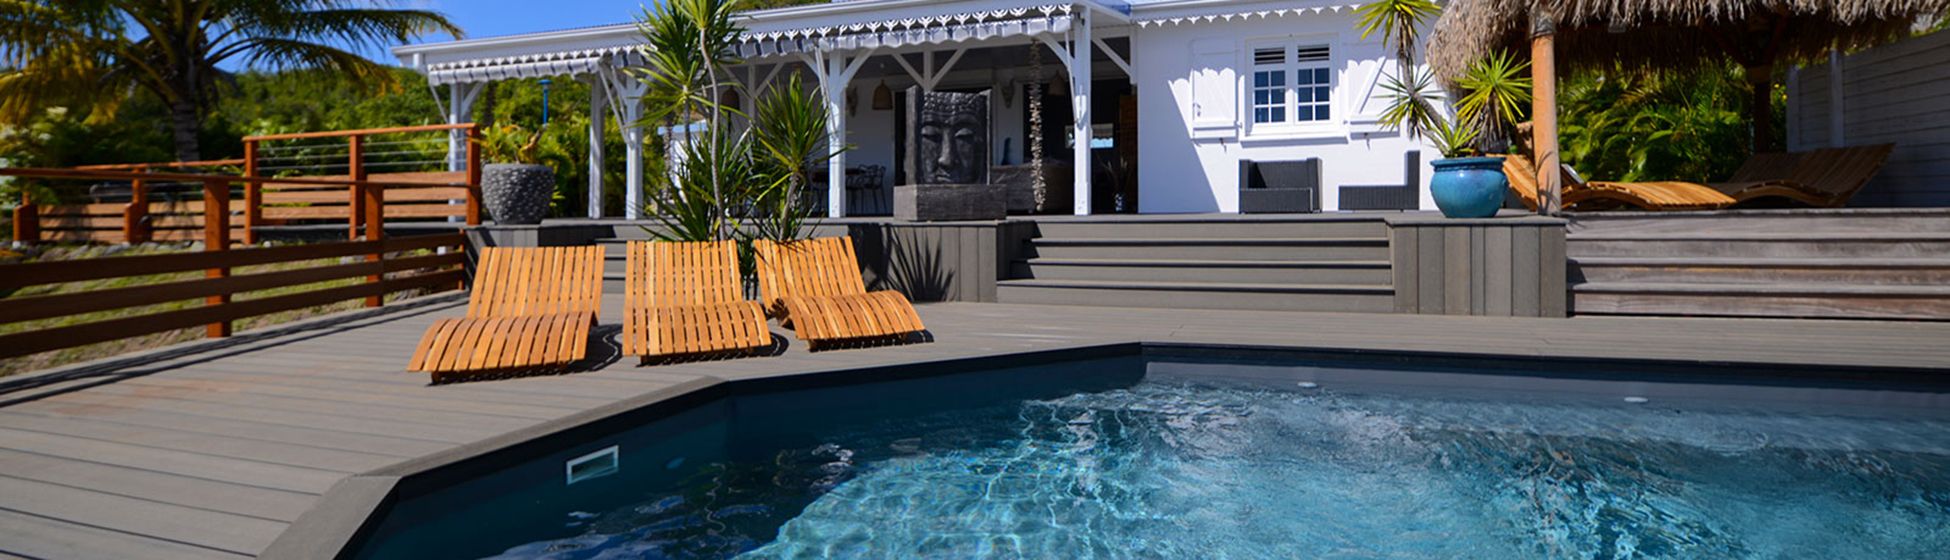 Location residence vacances martinique